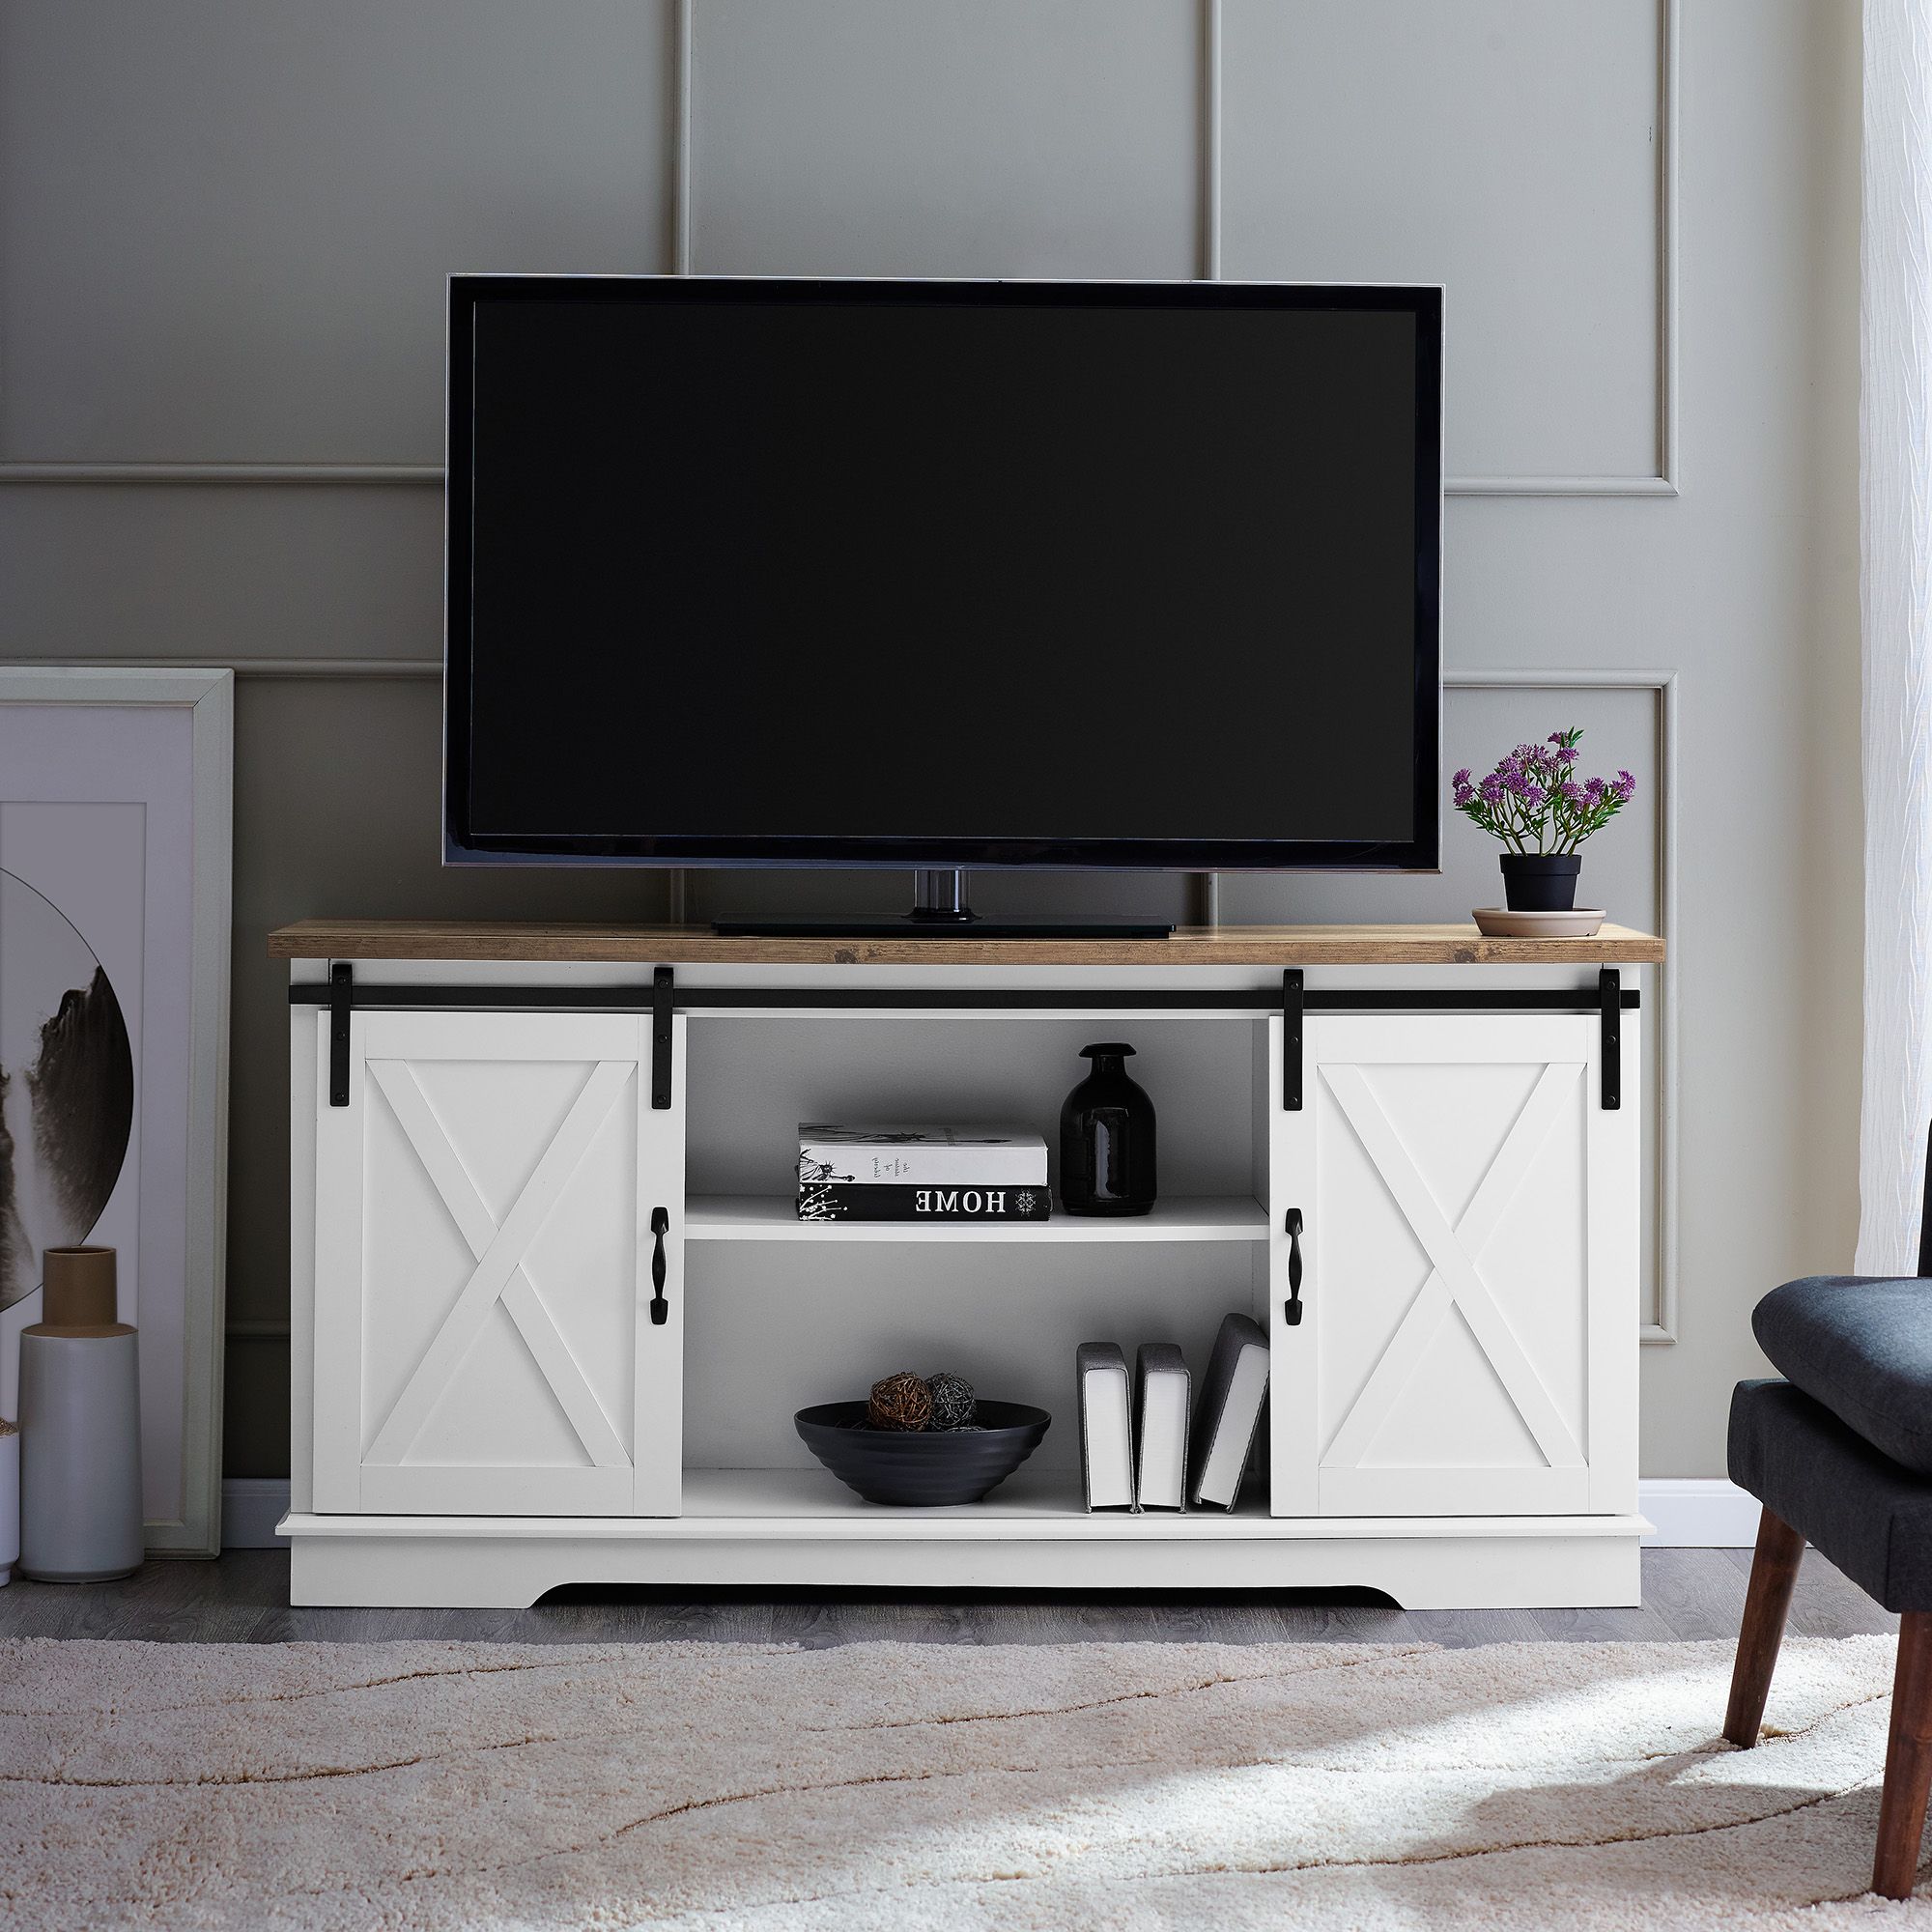 Manor Park Barn Door Tv Stand For Tvs Up To 65", White Throughout Better Homes &amp; Gardens Modern Farmhouse Tv Stands With Multiple Finishes (Gallery 23 of 31)